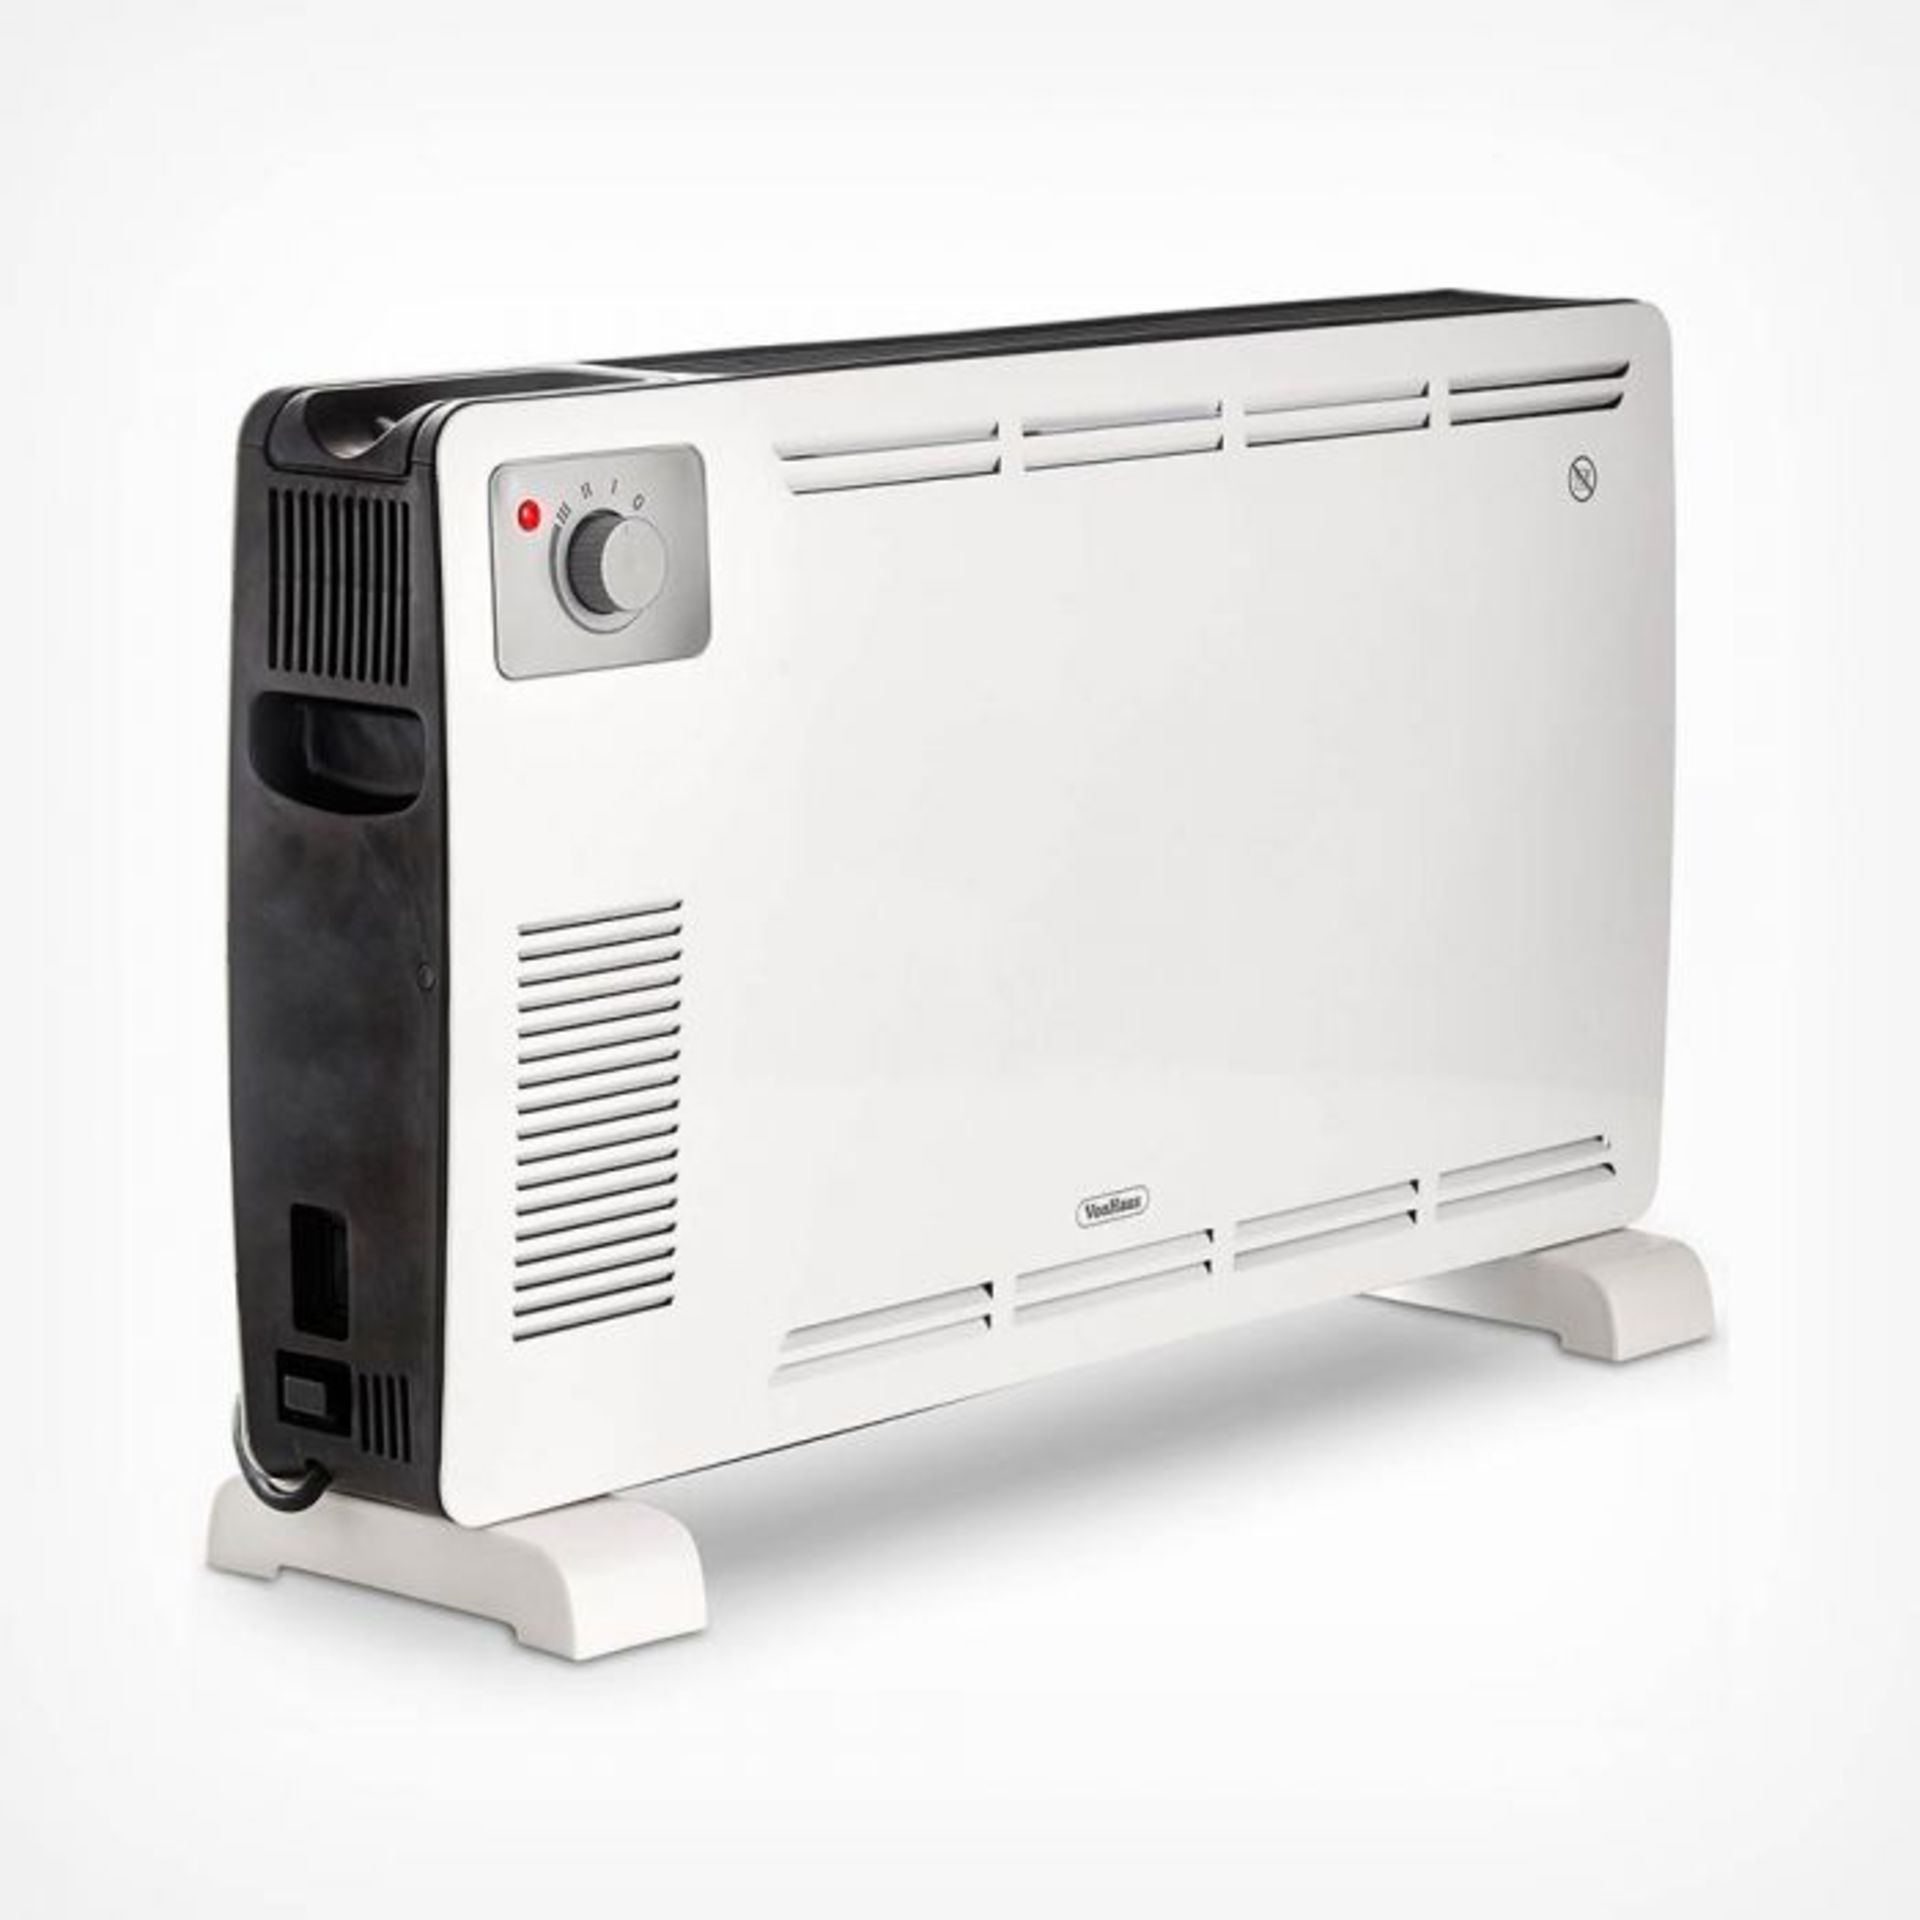 2200W Convector Heater - White. This convector heats up quickly thanks to convection technology. - Image 5 of 5